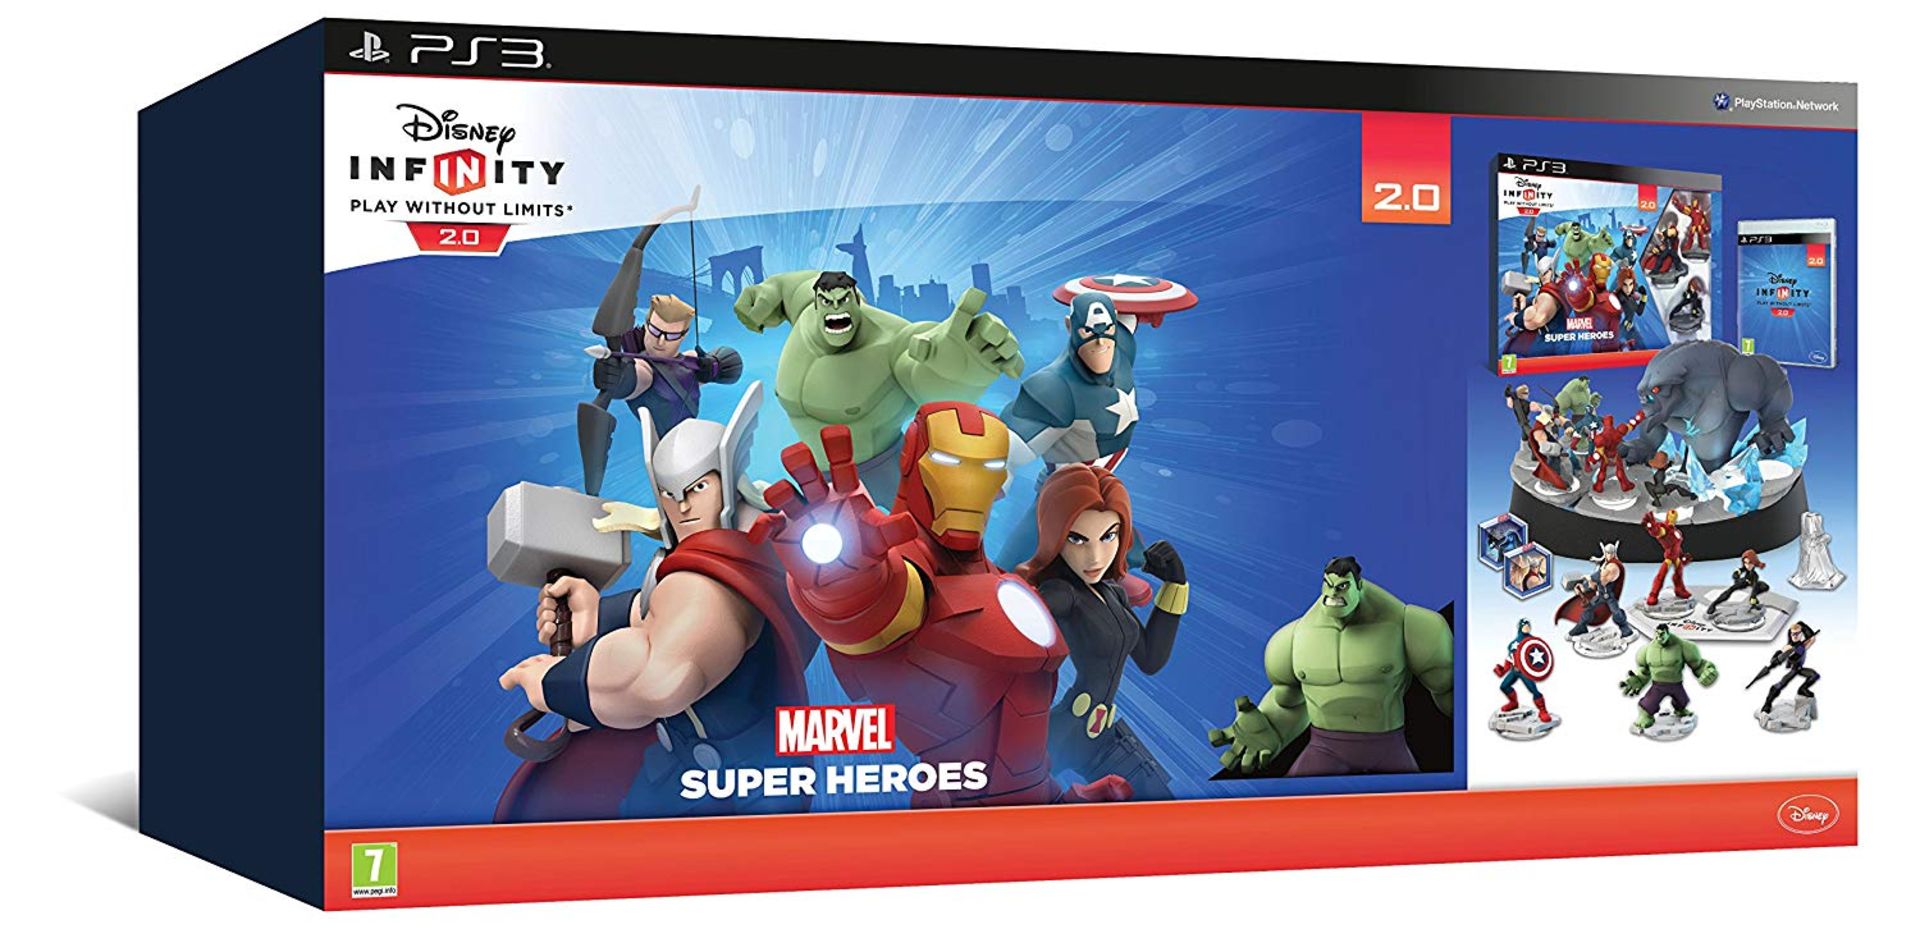 20 x Disney Infinity 2.0 Collectors Edition Avengers Starter Pack | @ RRP £34.5 | Total: £690